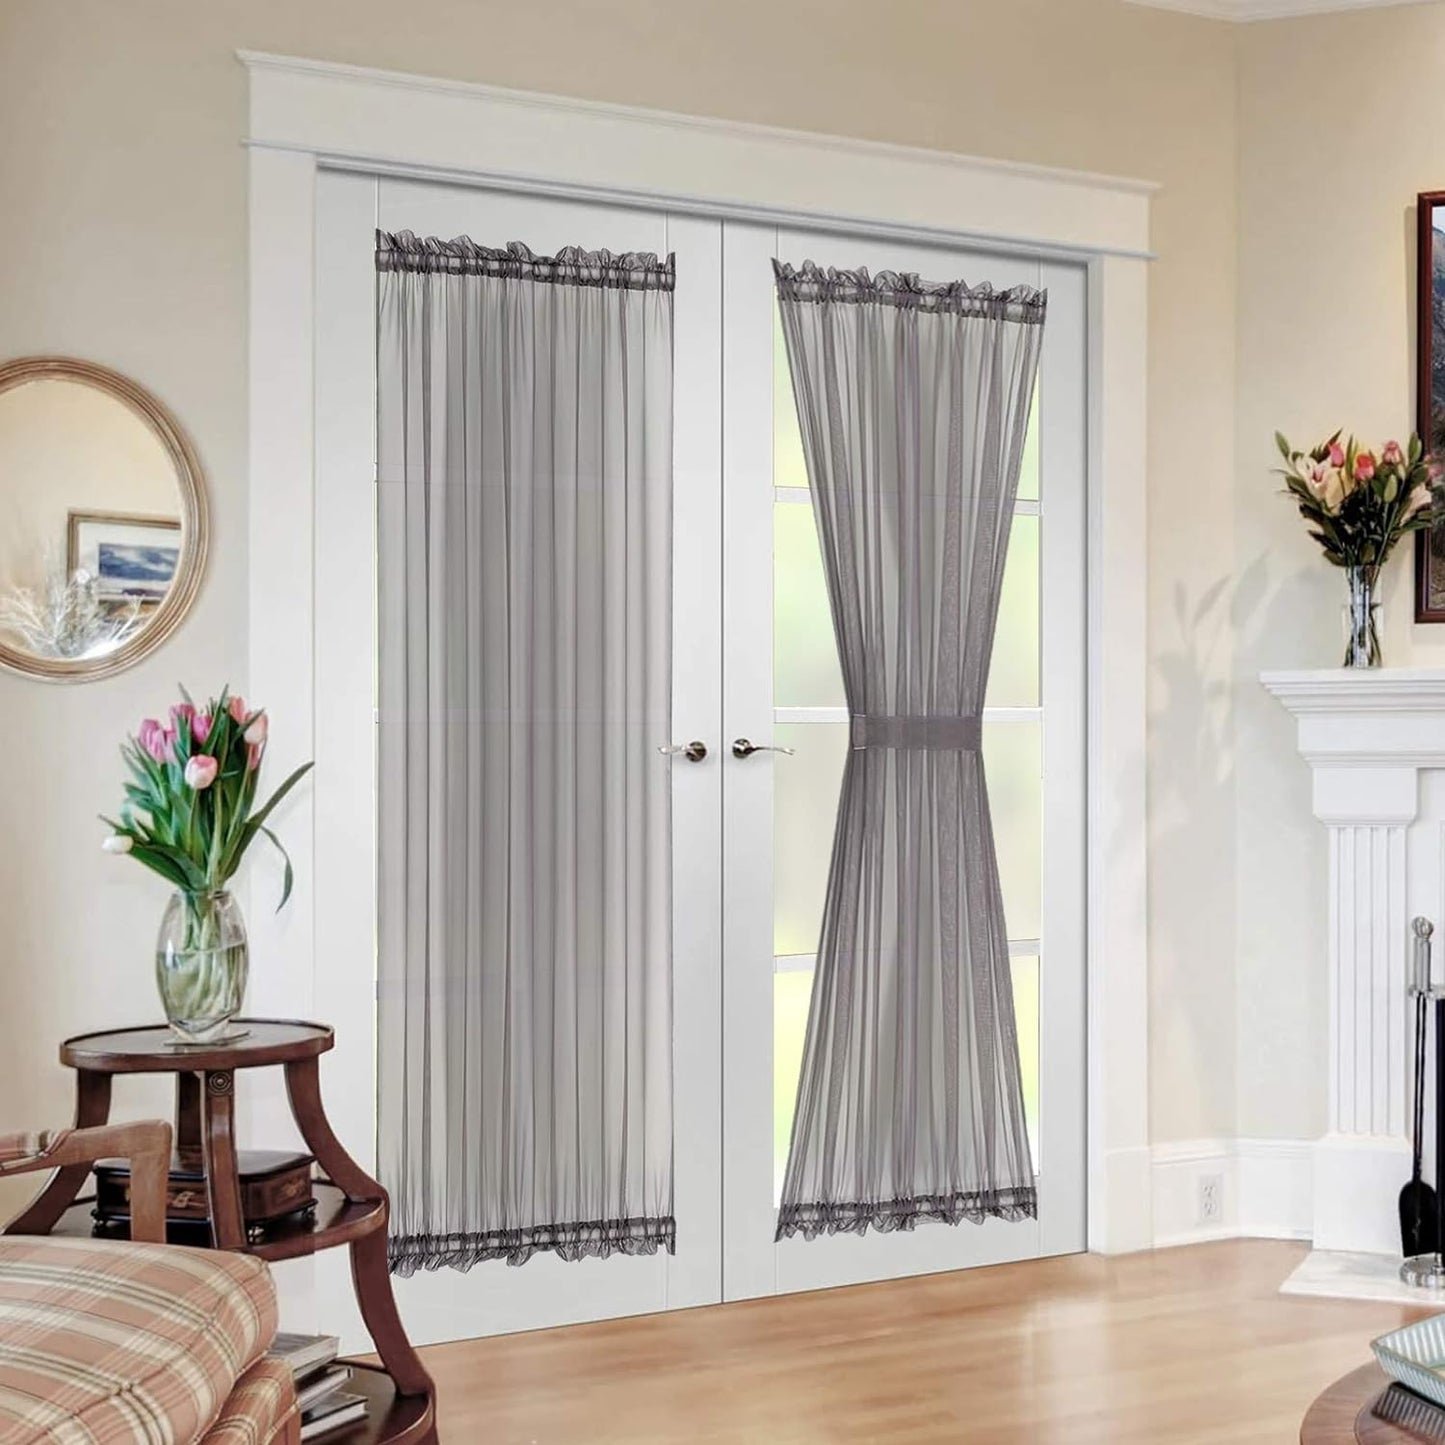 MIULEE French Door Sheer Curtains for Front Back Patio Glass Door Light Filtering Window Treatment with 2 Tiebacks 54 Wide and 72 Inches Length, White, Set of 2  MIULEE Dark Grey 54"W X 72"L 